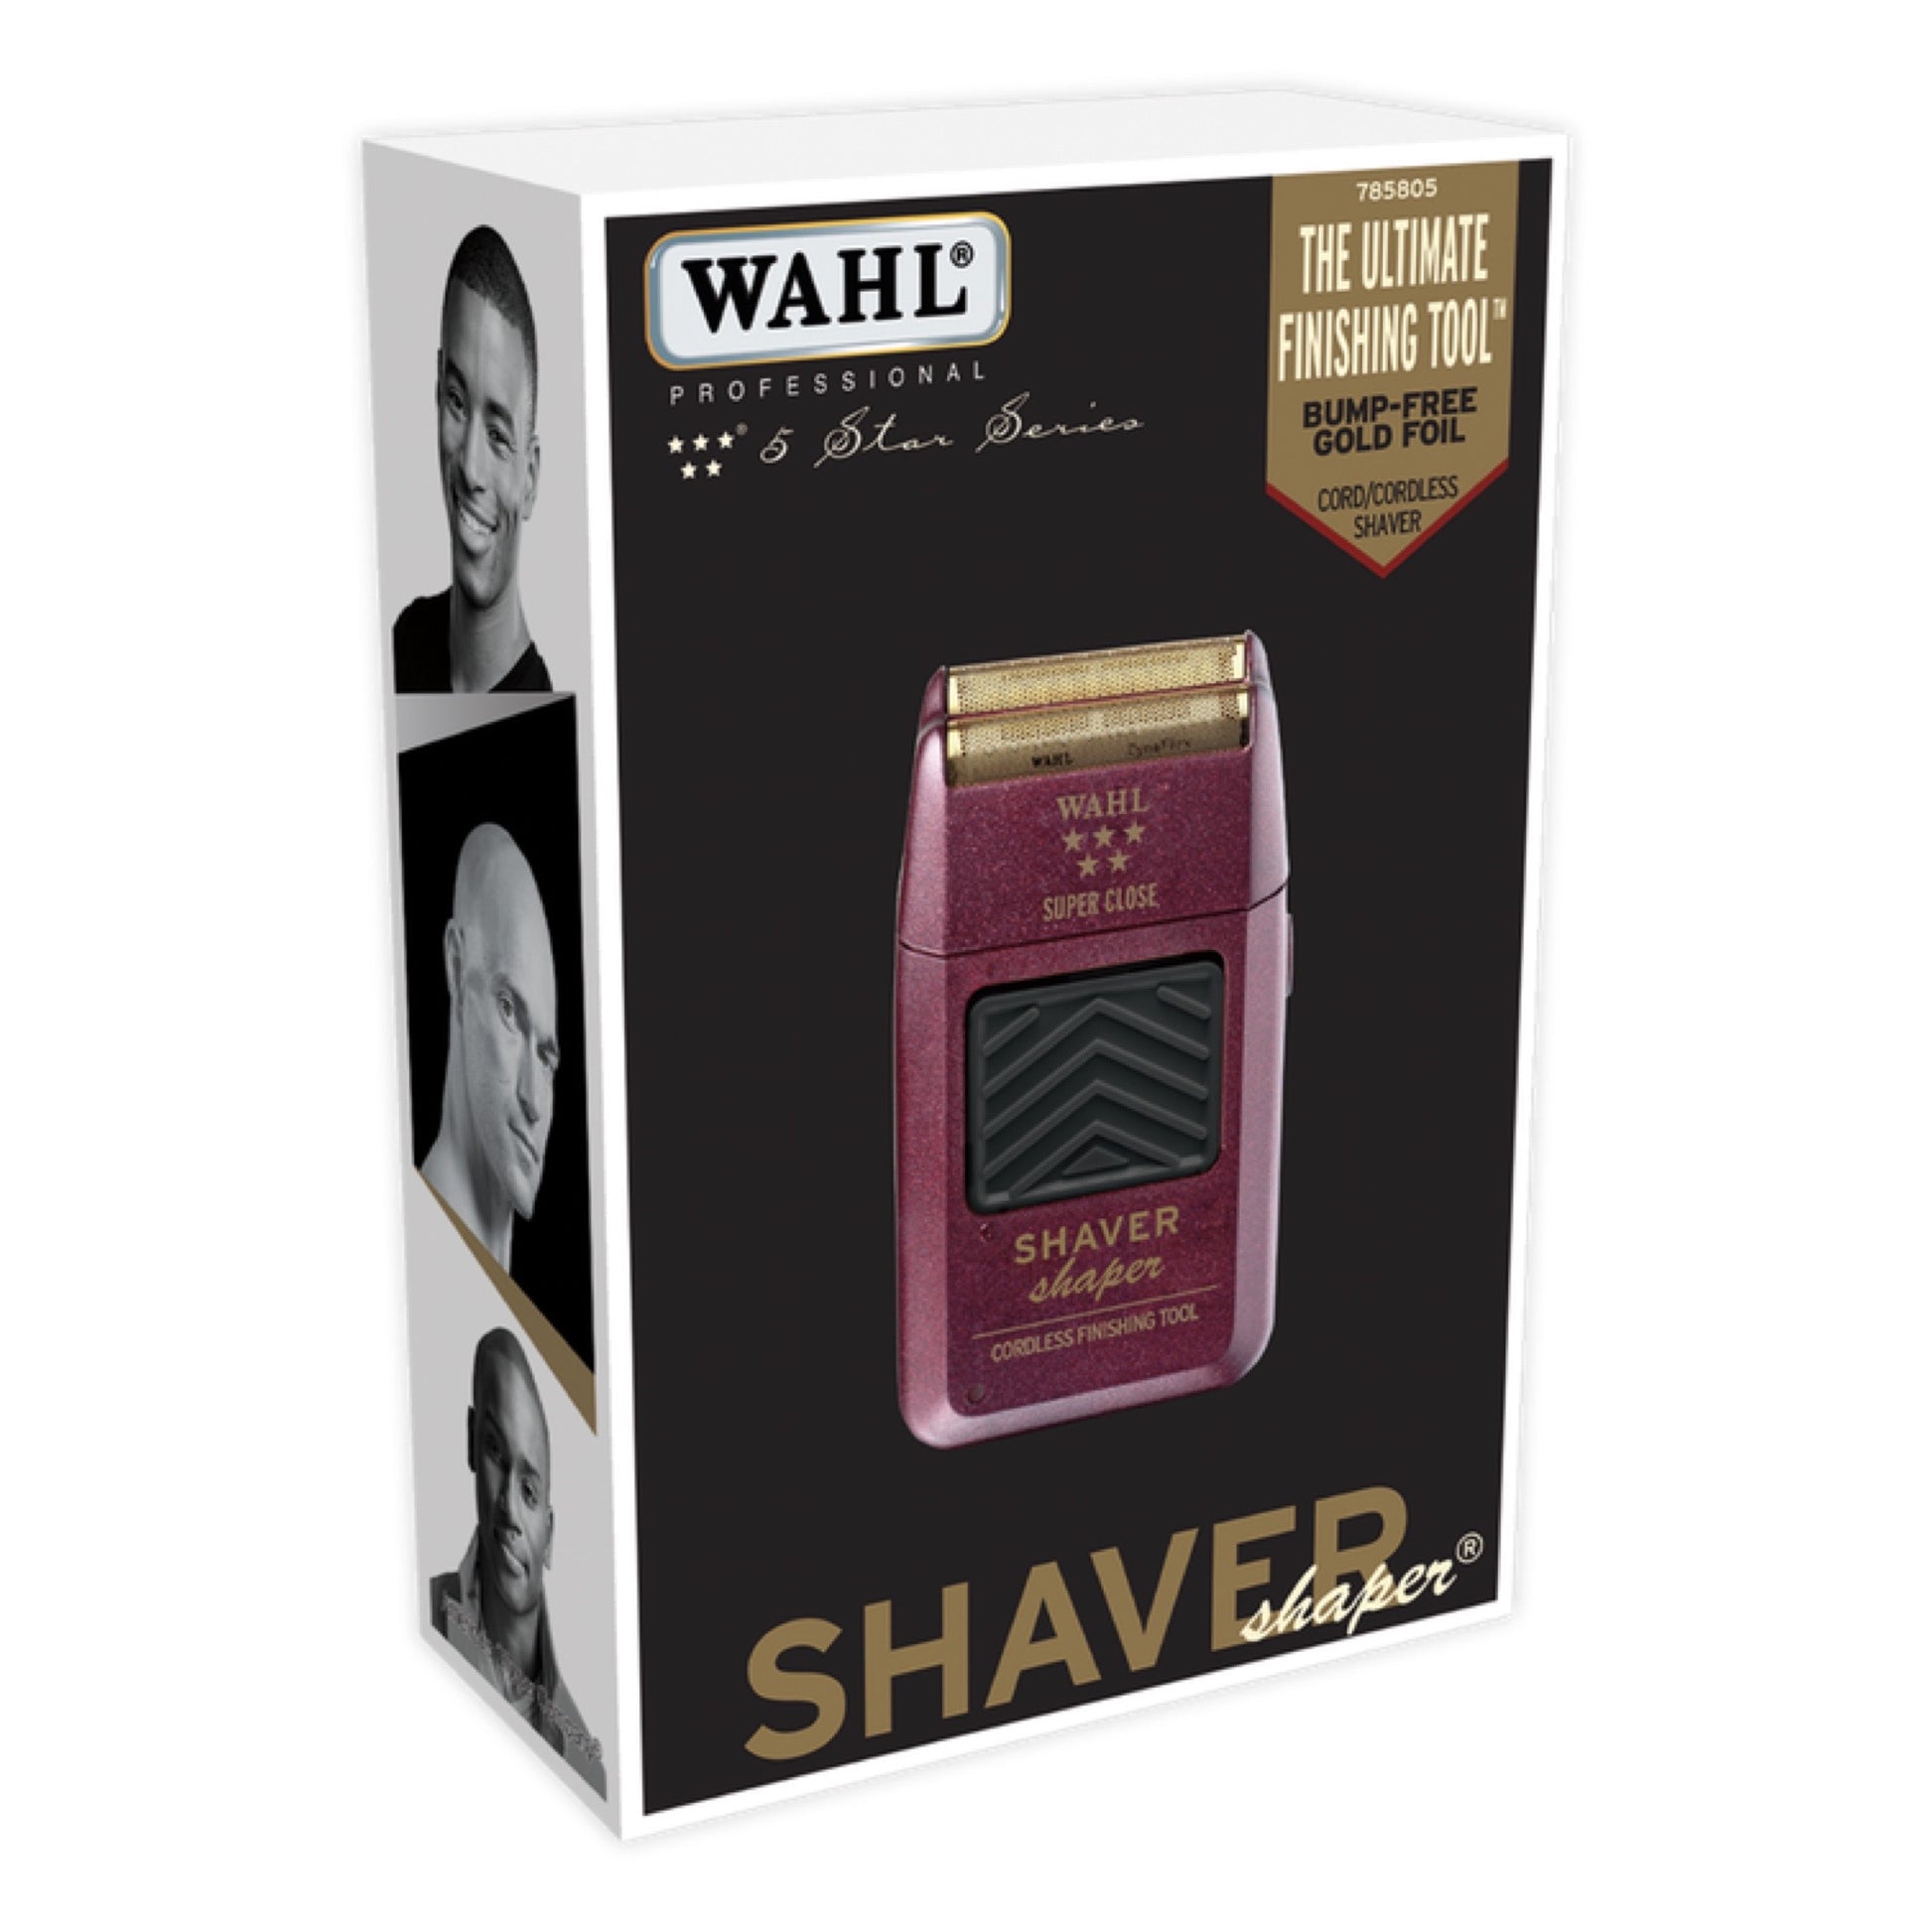 WAHL 5 STAR SHAVER - Ziarot Professional Beverly Hills